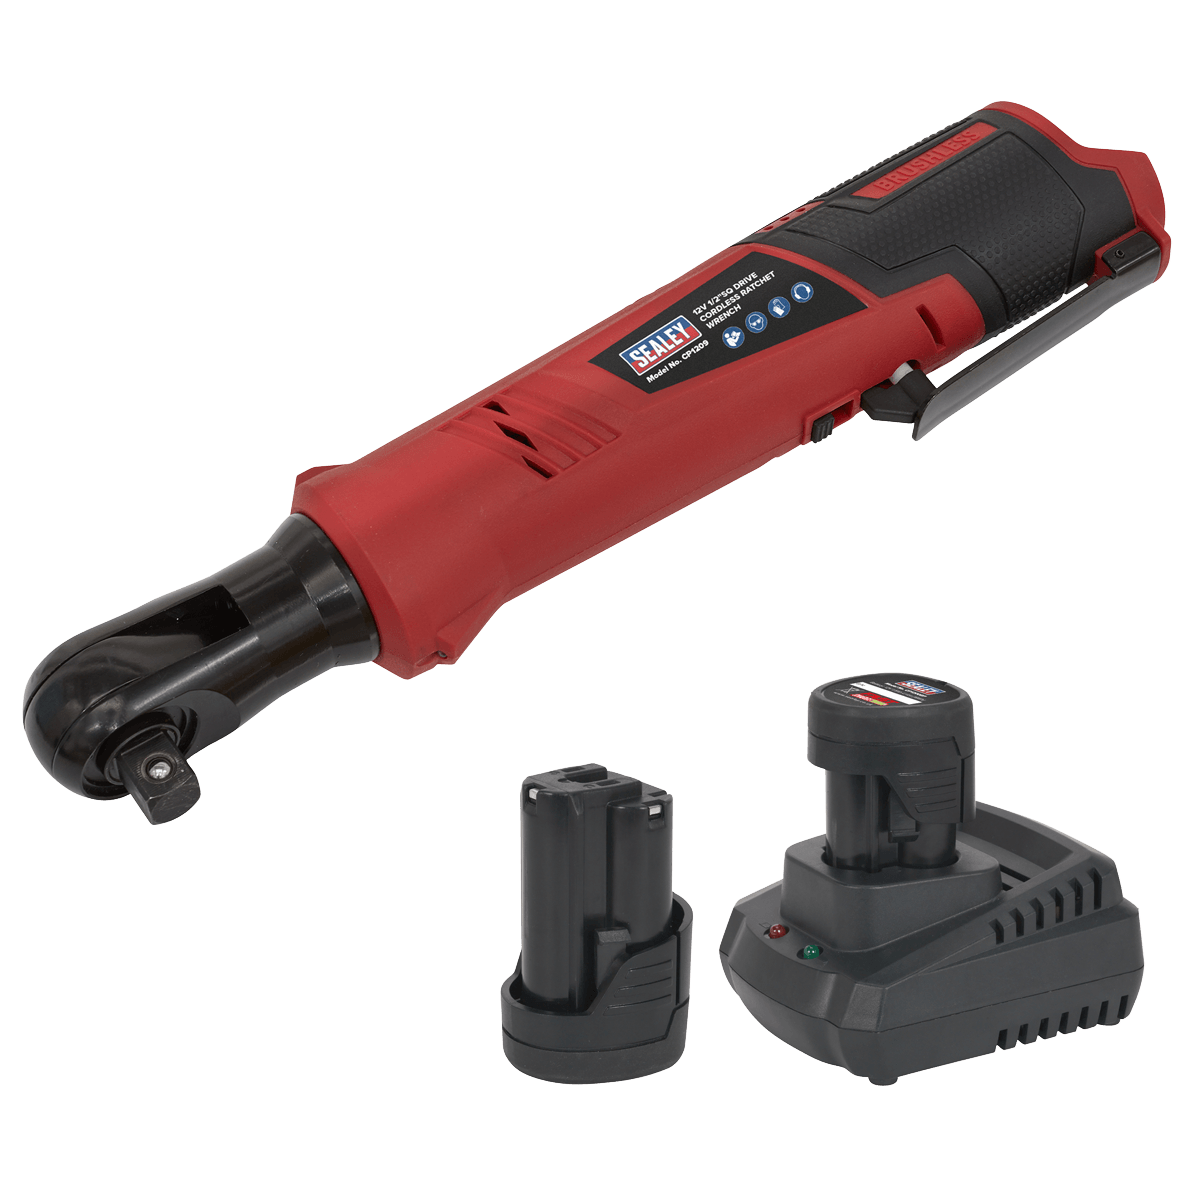 Sealey Cordless Ratchet Wrench Kit 1/2"Sq Drive 12V SV12 Series - 2 Batteries + Charger CP1209KIT - Tools 2U Direct SW